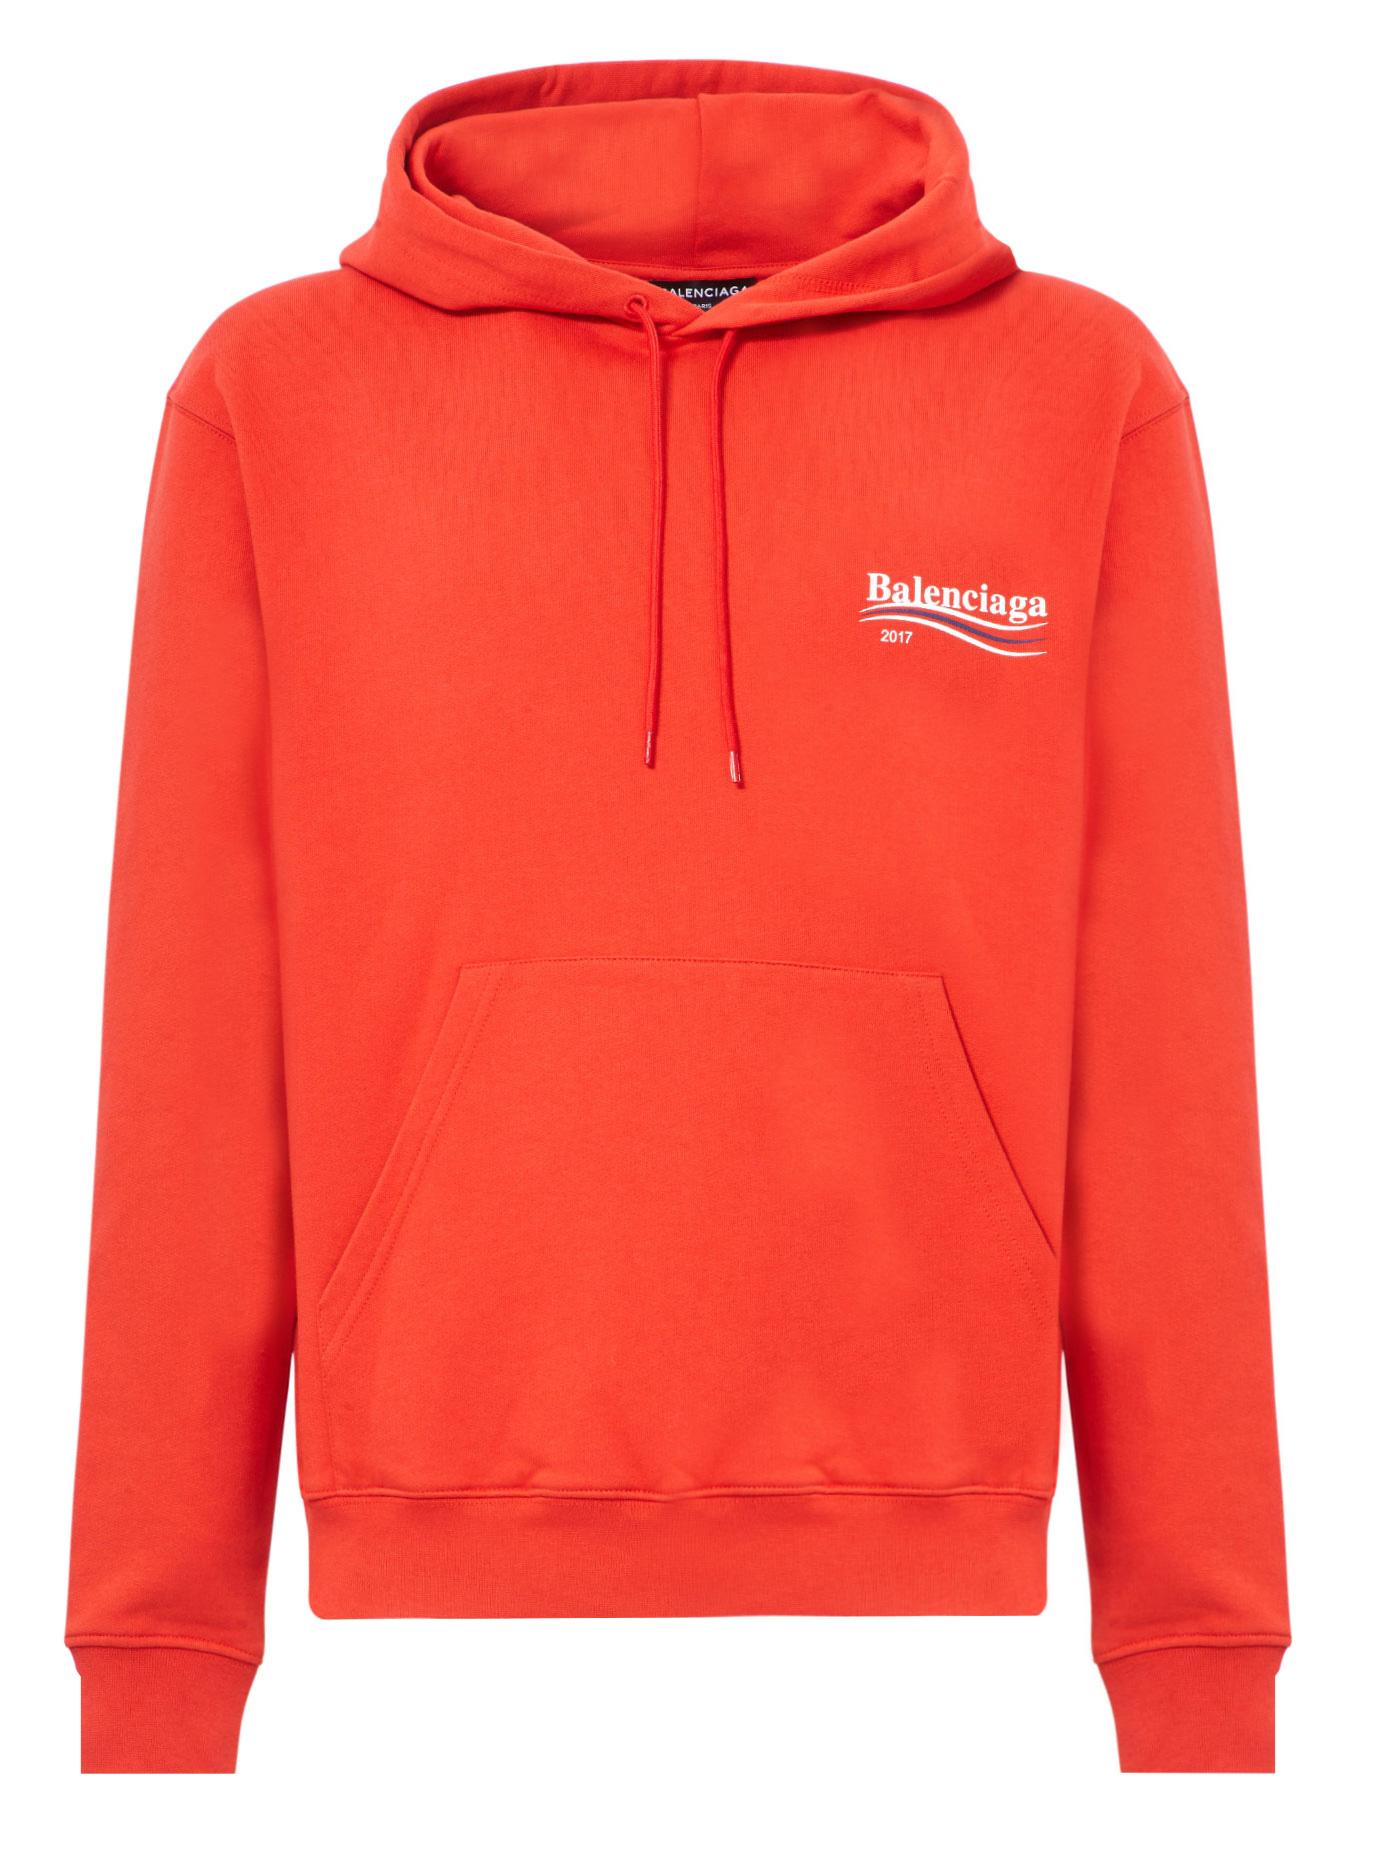 Lyst - Balenciaga Campaign Logo Cotton Hoodie in Red for Men